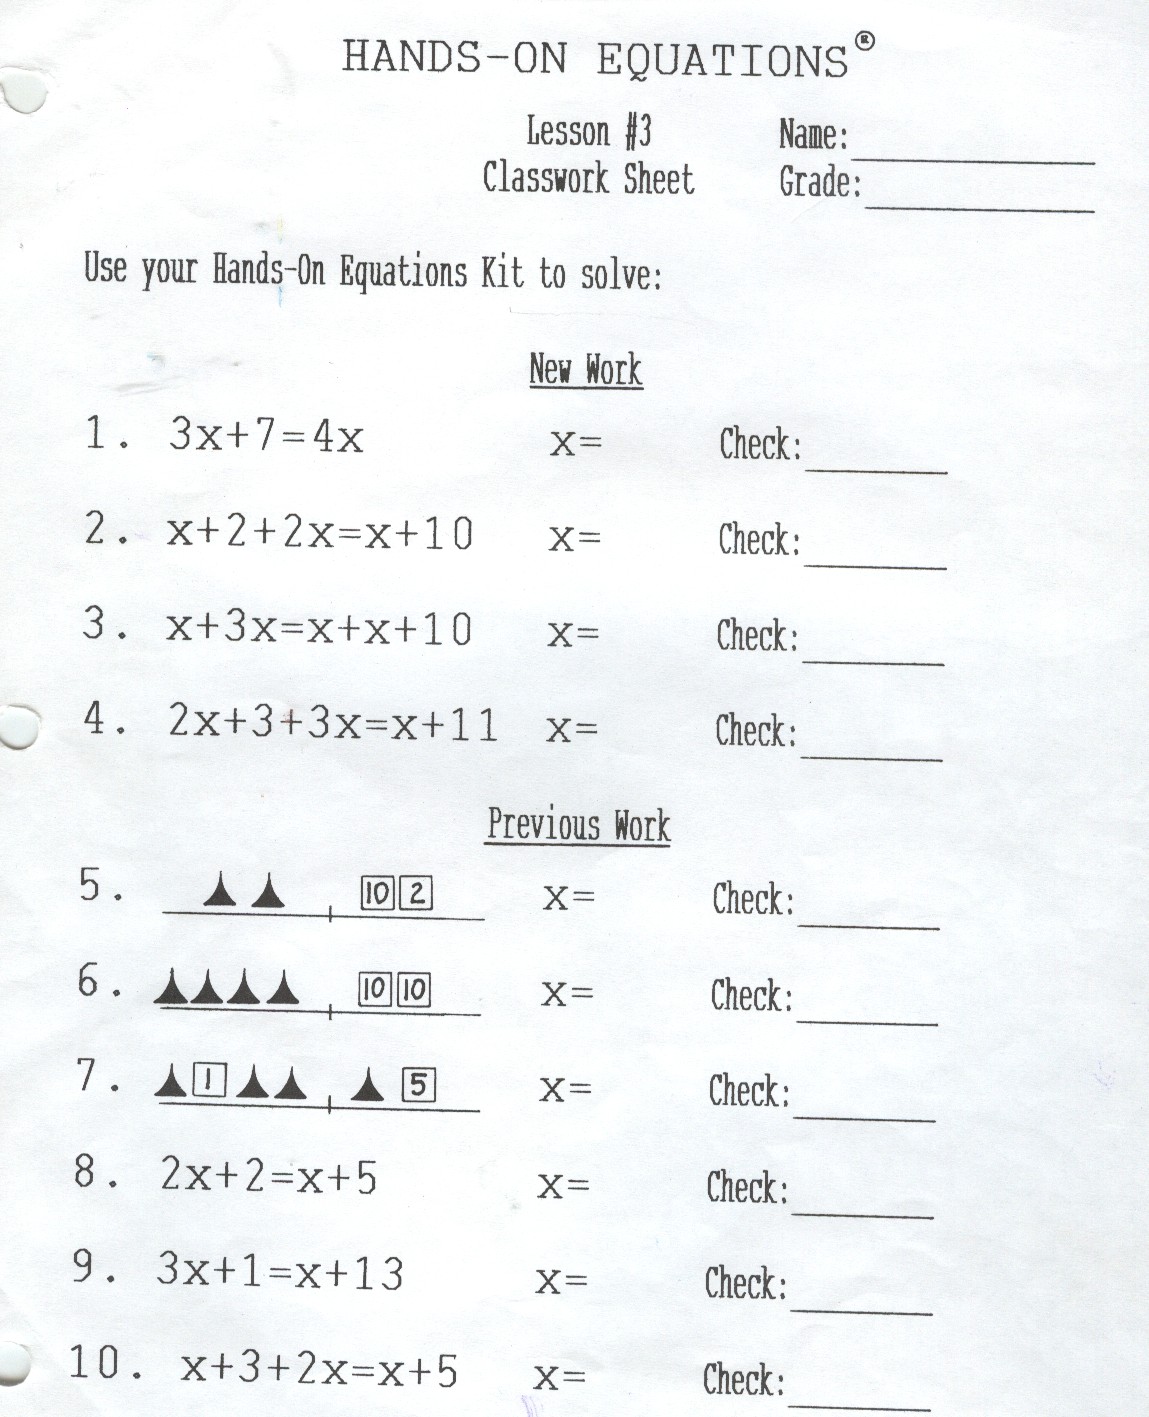 Monday, March 21, 21 With Hands On Equations Worksheet